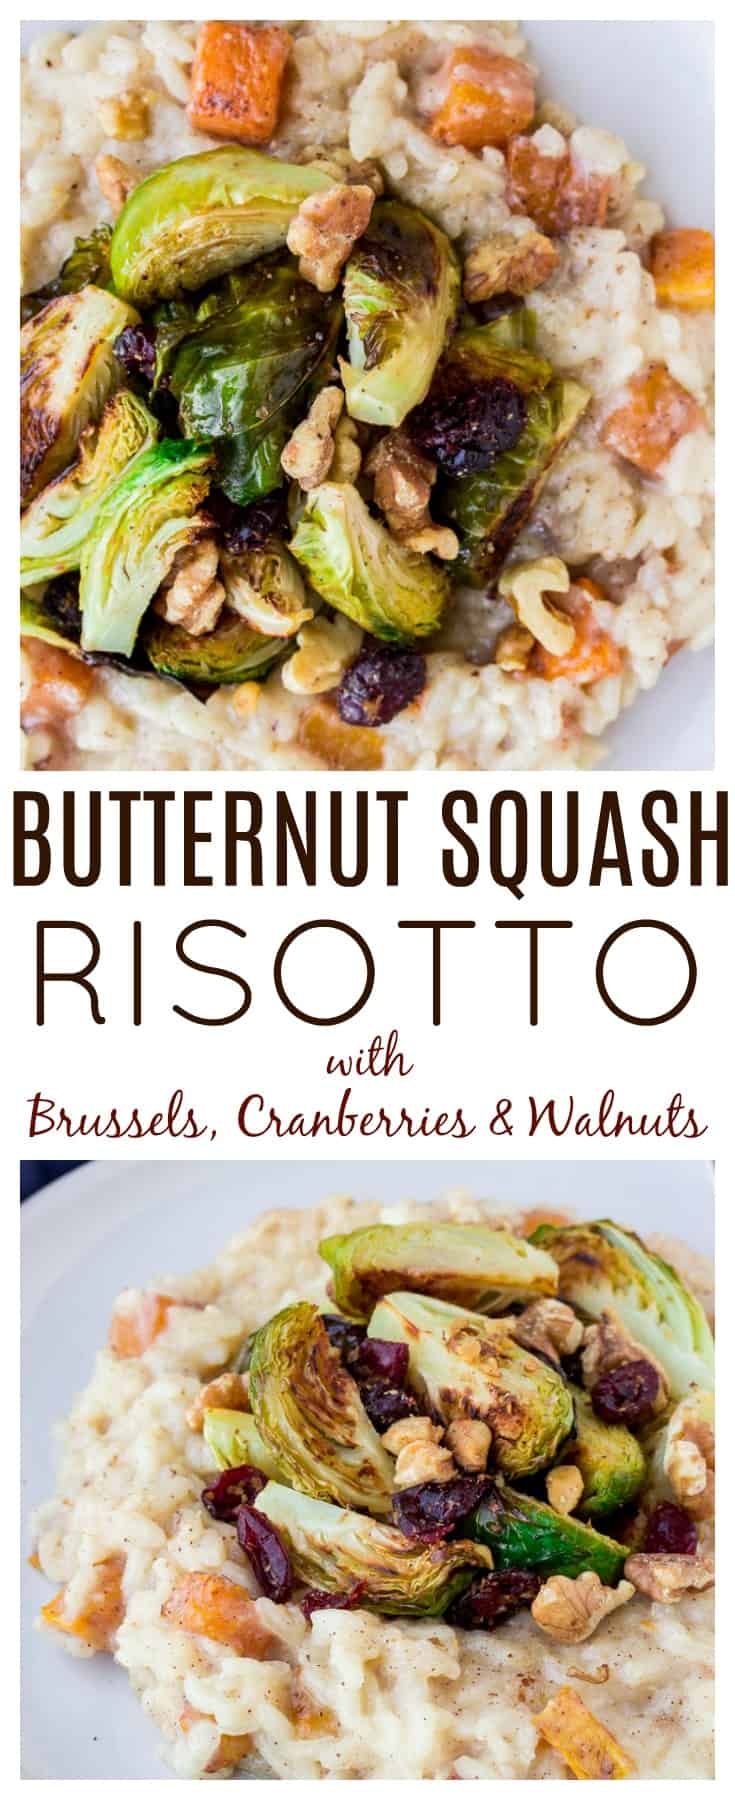 Roasted Butternut Squash Risotto is the perfect blend of creaminess and warm spiciness. Topped with Brussels sprouts, cranberries, and walnuts, it's the perfect risotto recipe for Fall! This can be served as a vegetarian main dish, or as a side dish! | #dlbrecipes #fallrisotto #butternutsquash #butternutsquashrisotto #fallrecipes